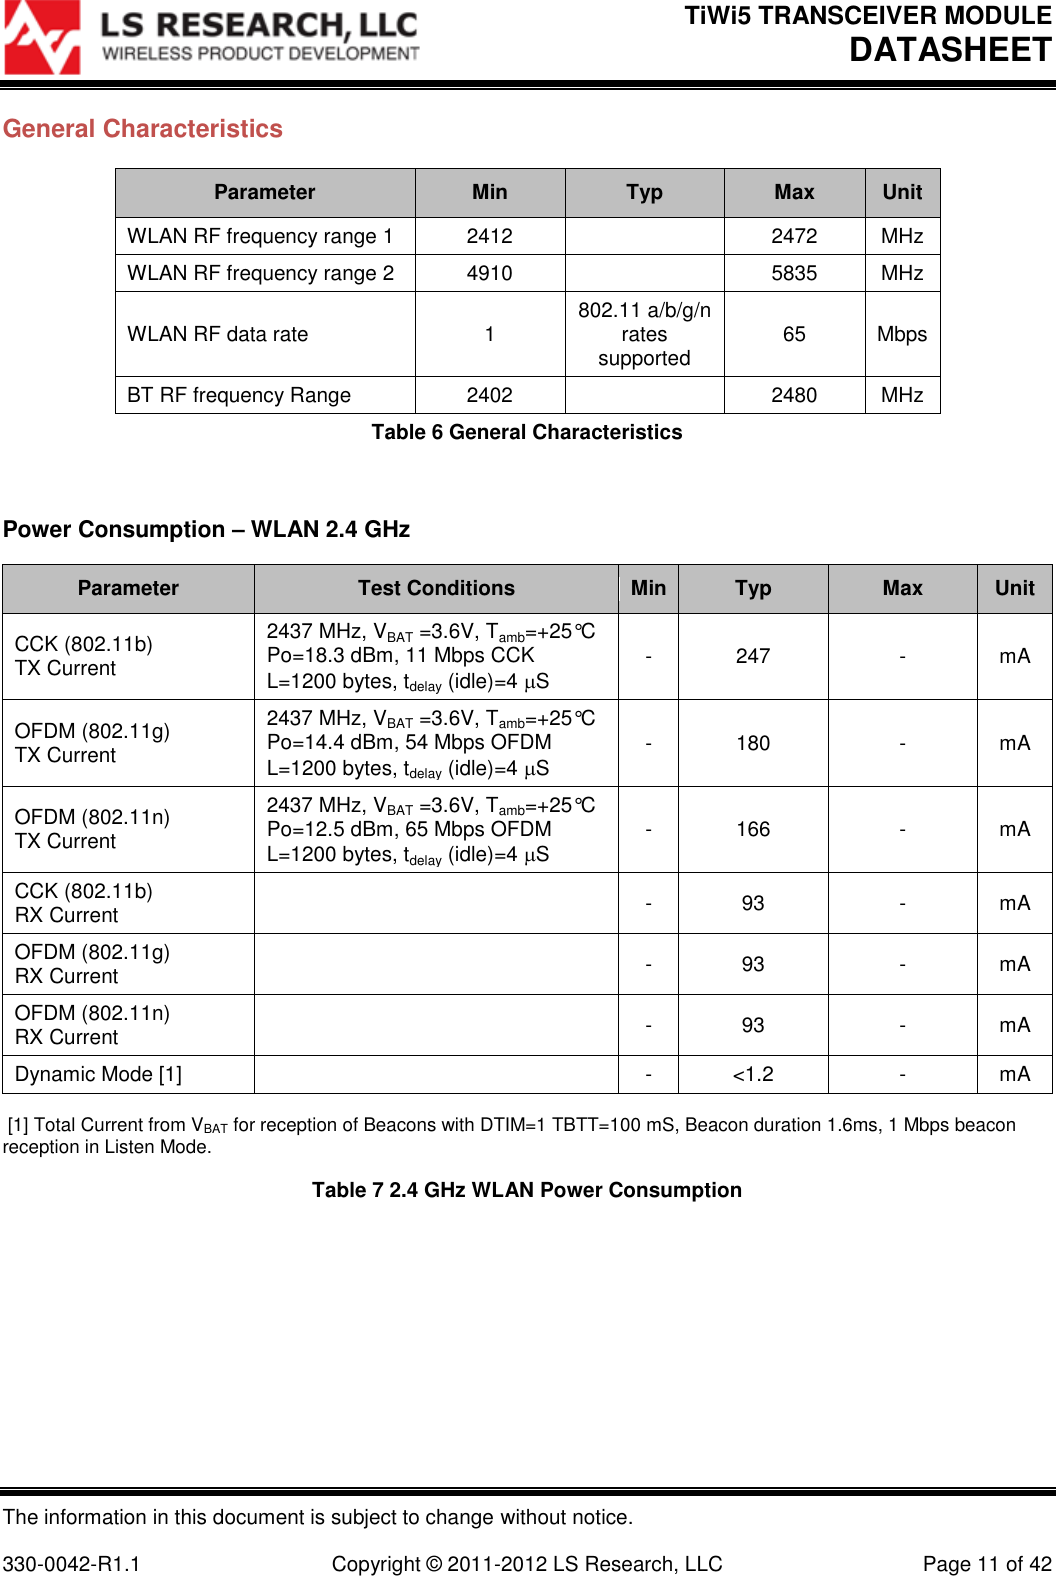 TiWi5 TRANSCEIVER MODULE DATASHEET  The information in this document is subject to change without notice.  330-0042-R1.1    Copyright © 2011-2012 LS Research, LLC  Page 11 of 42 General Characteristics Parameter Min Typ Max Unit WLAN RF frequency range 1 2412  2472 MHz WLAN RF frequency range 2 4910  5835 MHz WLAN RF data rate 1 802.11 a/b/g/n rates supported 65 Mbps BT RF frequency Range  2402  2480 MHz Table 6 General Characteristics  Power Consumption – WLAN 2.4 GHz Parameter Test Conditions Min Typ Max Unit CCK (802.11b) TX Current  2437 MHz, VBAT =3.6V, Tamb=+25°C Po=18.3 dBm, 11 Mbps CCK  L=1200 bytes, tdelay (idle)=4 S - 247 - mA OFDM (802.11g) TX Current 2437 MHz, VBAT =3.6V, Tamb=+25°C Po=14.4 dBm, 54 Mbps OFDM  L=1200 bytes, tdelay (idle)=4 S - 180 - mA OFDM (802.11n) TX Current  2437 MHz, VBAT =3.6V, Tamb=+25°C Po=12.5 dBm, 65 Mbps OFDM  L=1200 bytes, tdelay (idle)=4 S - 166 - mA CCK (802.11b) RX Current   - 93 - mA OFDM (802.11g) RX Current  - 93 - mA OFDM (802.11n) RX Current   - 93 - mA Dynamic Mode [1]   - &lt;1.2 - mA  [1] Total Current from VBAT for reception of Beacons with DTIM=1 TBTT=100 mS, Beacon duration 1.6ms, 1 Mbps beacon reception in Listen Mode.  Table 7 2.4 GHz WLAN Power Consumption    